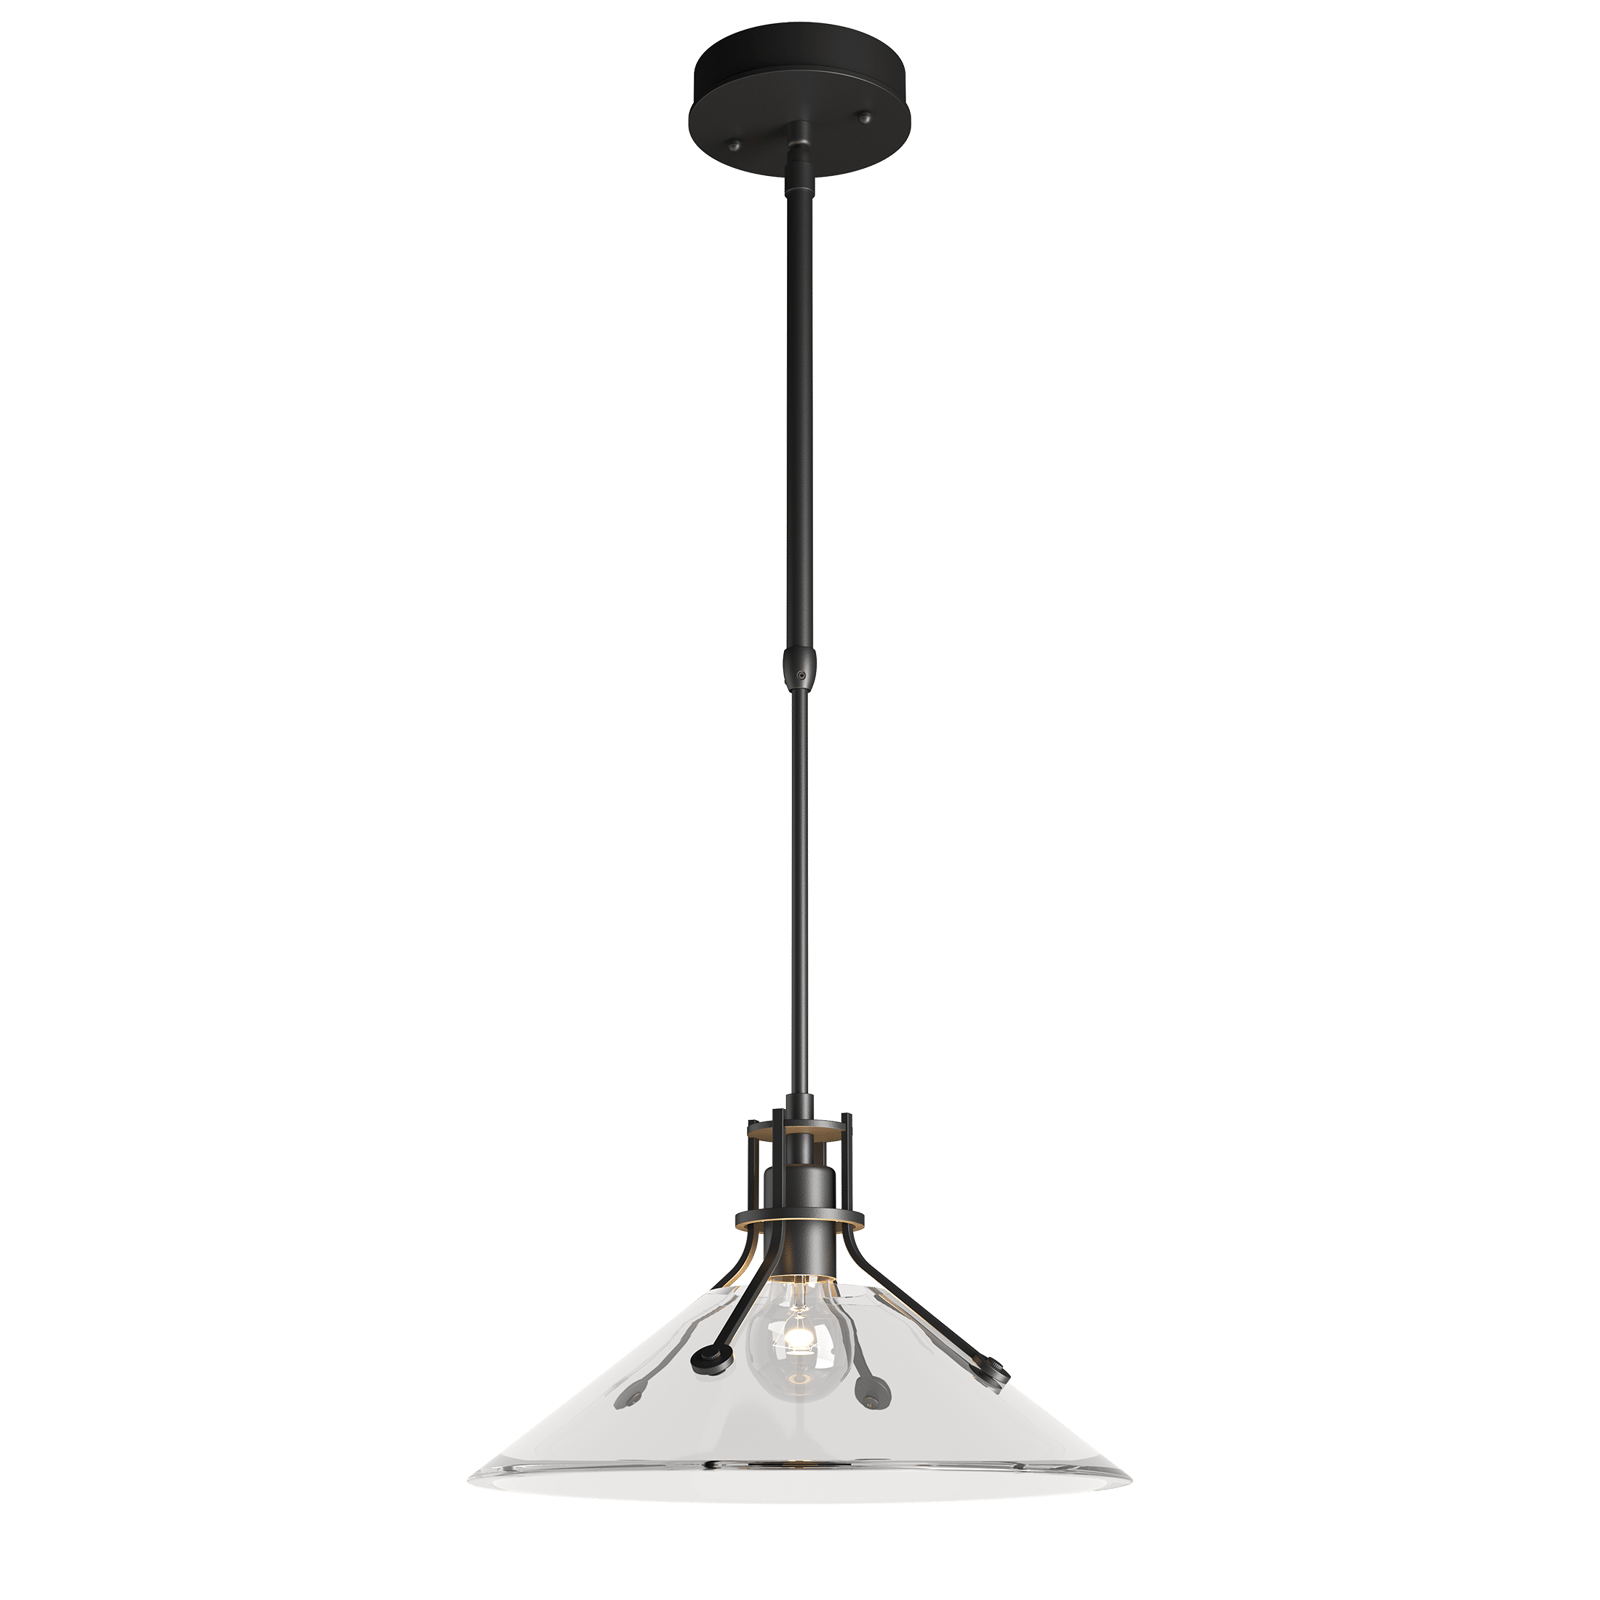 Hubbardton Forge Henry Outdoor Pendant with Glass Medium Outdoor Light Fixture l Hanging Hubbardton Forge Coastal Black Clear Glass (ZM) 